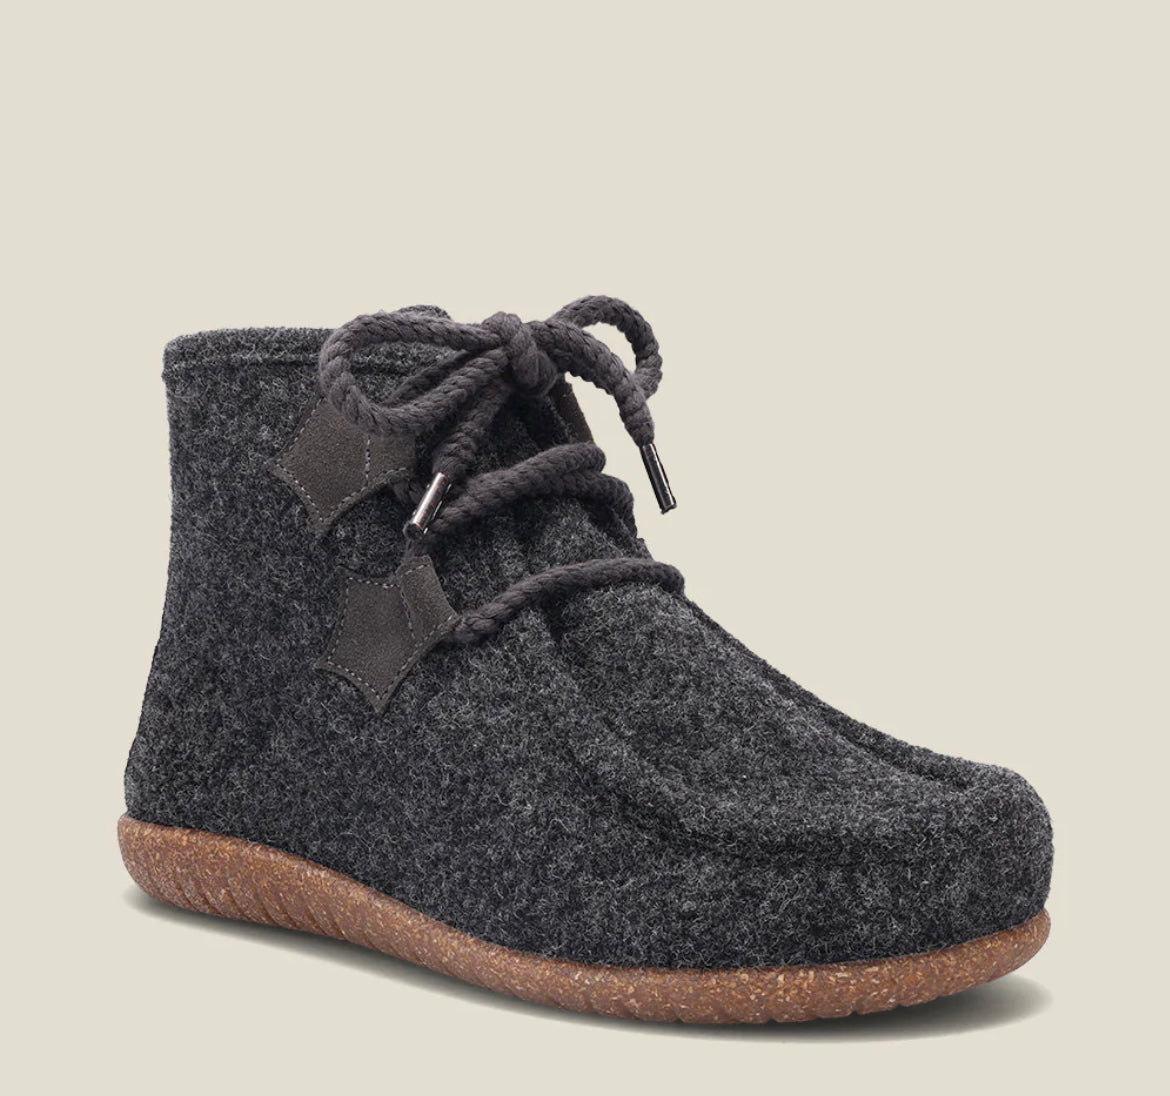 Taos Woolabee Charcoal Women’s Boot - All Mixed Up 